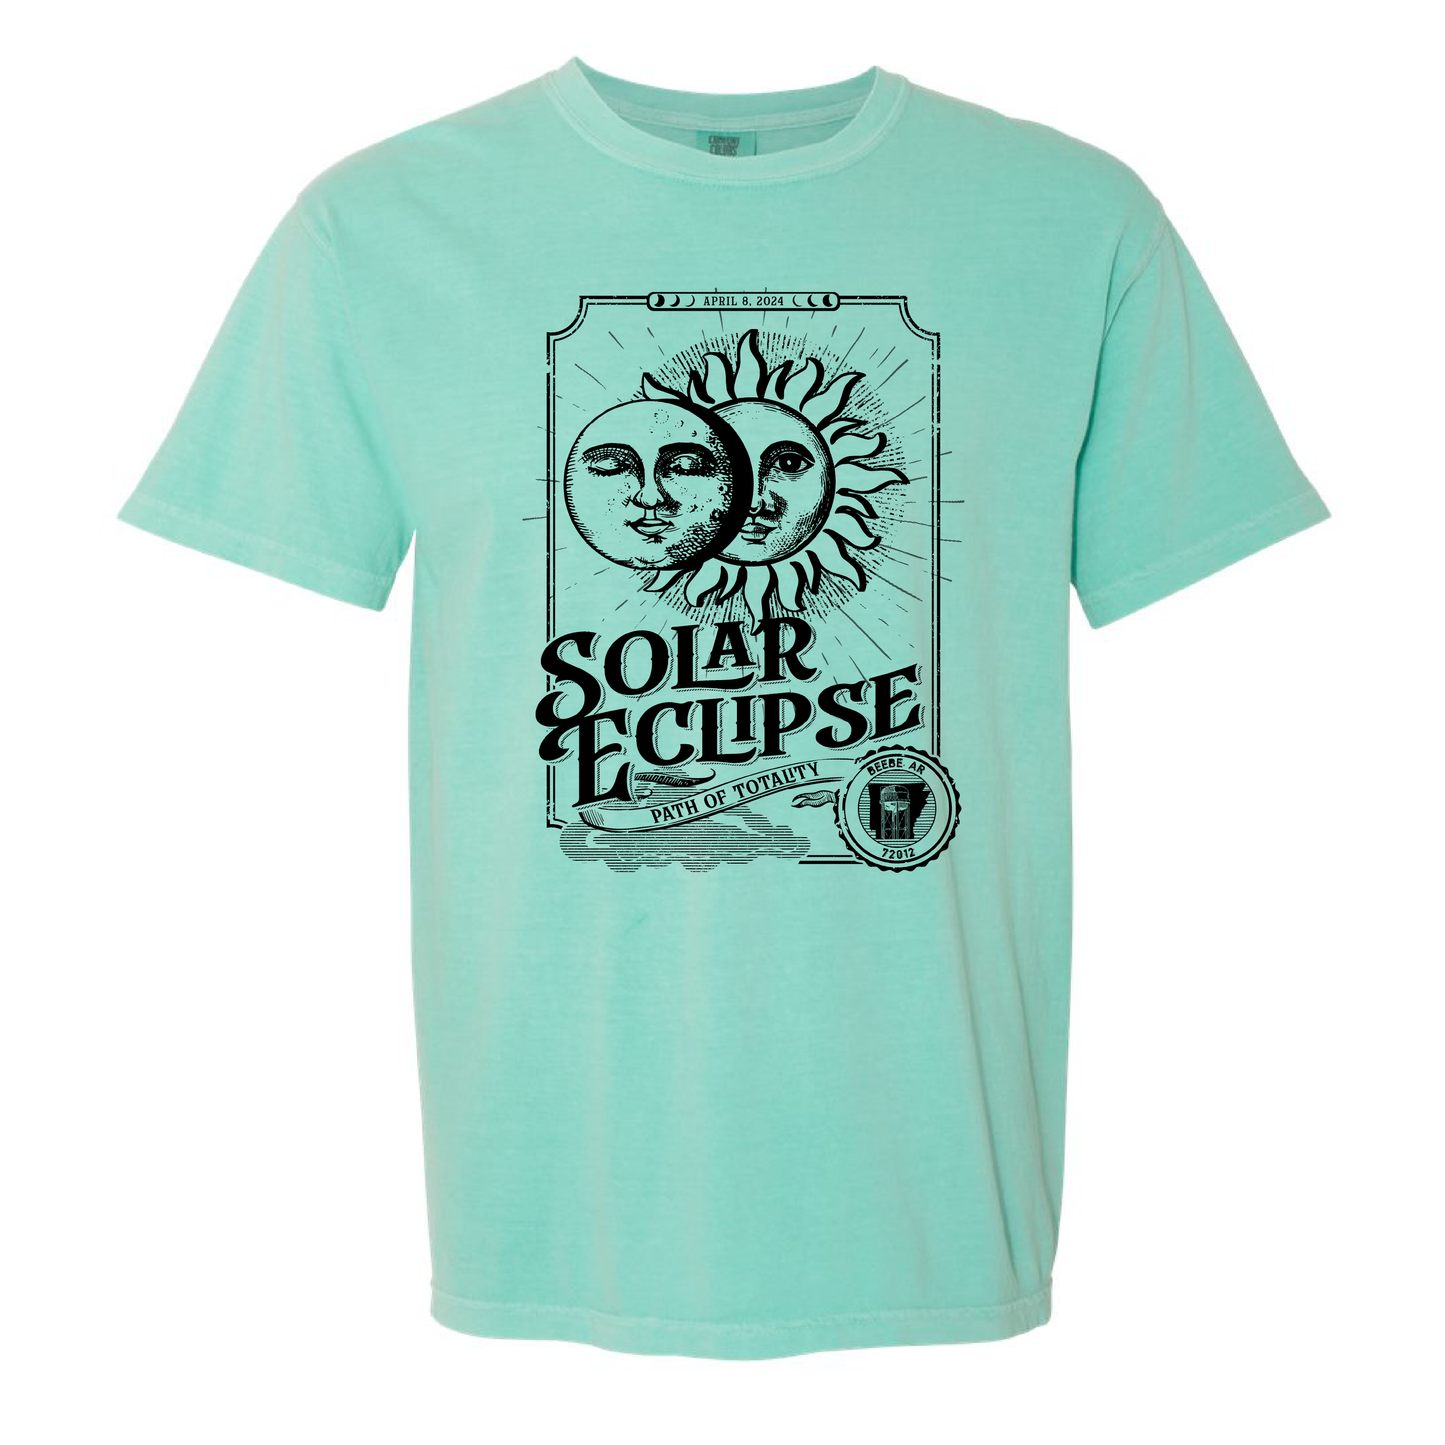 Solar Eclipse Tee - Chalky Mint